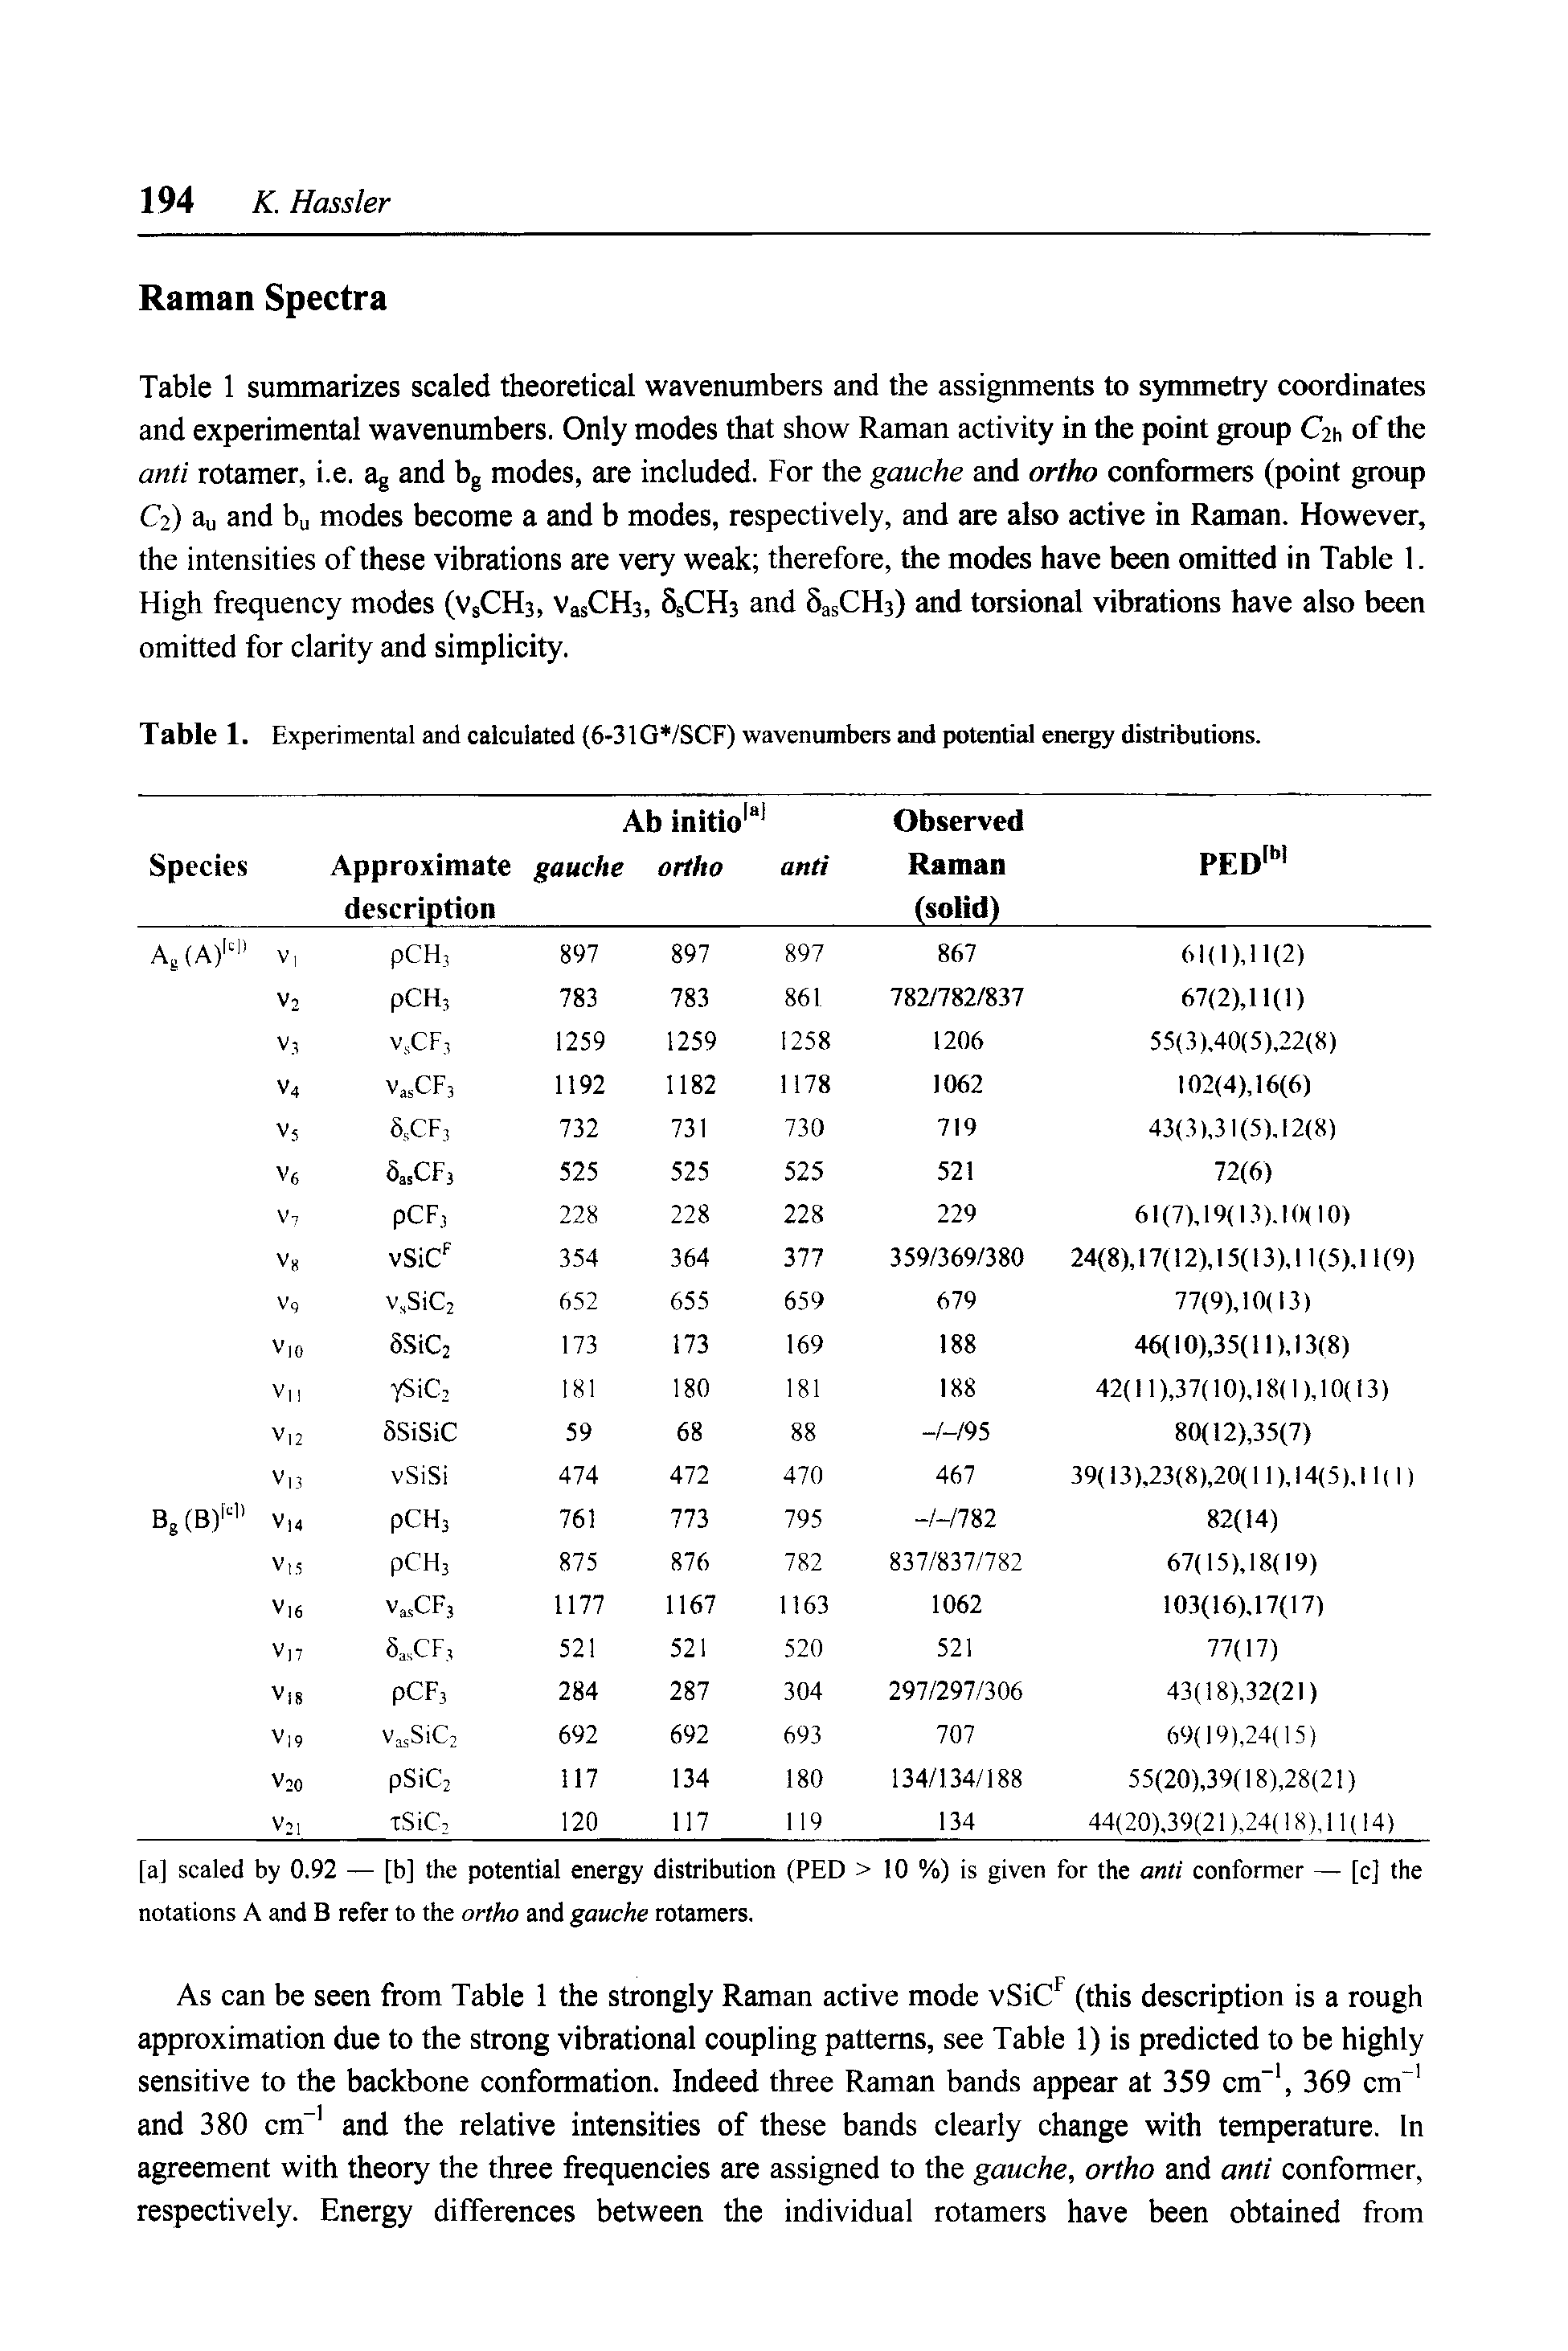 Table 1 summarizes scaled theoretical wavenumbers and the assignments to symmetry coordinates and experimental wavenumbers. Only modes that show Raman activity in the point group C2h of the anti rotamer, i.e. ag and bg modes, are included. For the gauche and ortho conformers (point group C2) au and b modes become a and b modes, respectively, and are also active in Raman. However, the intensities of these vibrations are very weak therefore, the modes have been omitted in Table 1. High frequency modes (VsCHs, VasCHa, SsCHb and SasCHs) and torsional vibrations have also been omitted for clarity and simplicity.